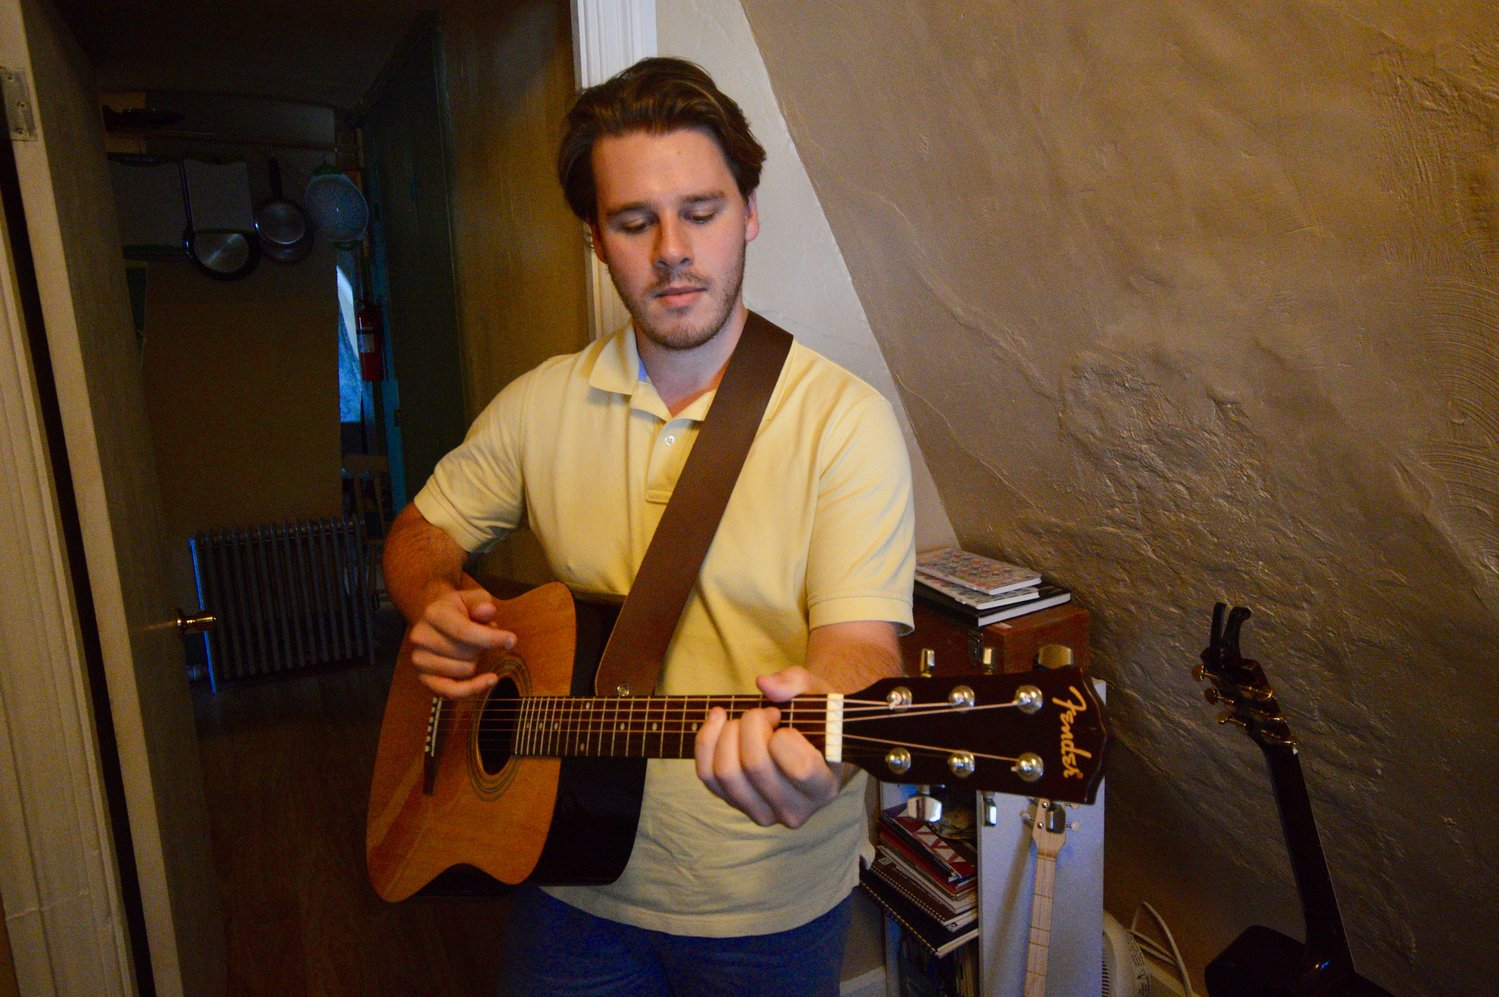 Nicholas Quigley plays acoustic guitar in his apartment’s tiny music studio that’s crammed with other instruments. He used guitar as a counterpoint to nature sounds he heard during a walk at Gooseberry Island in Massachusetts.